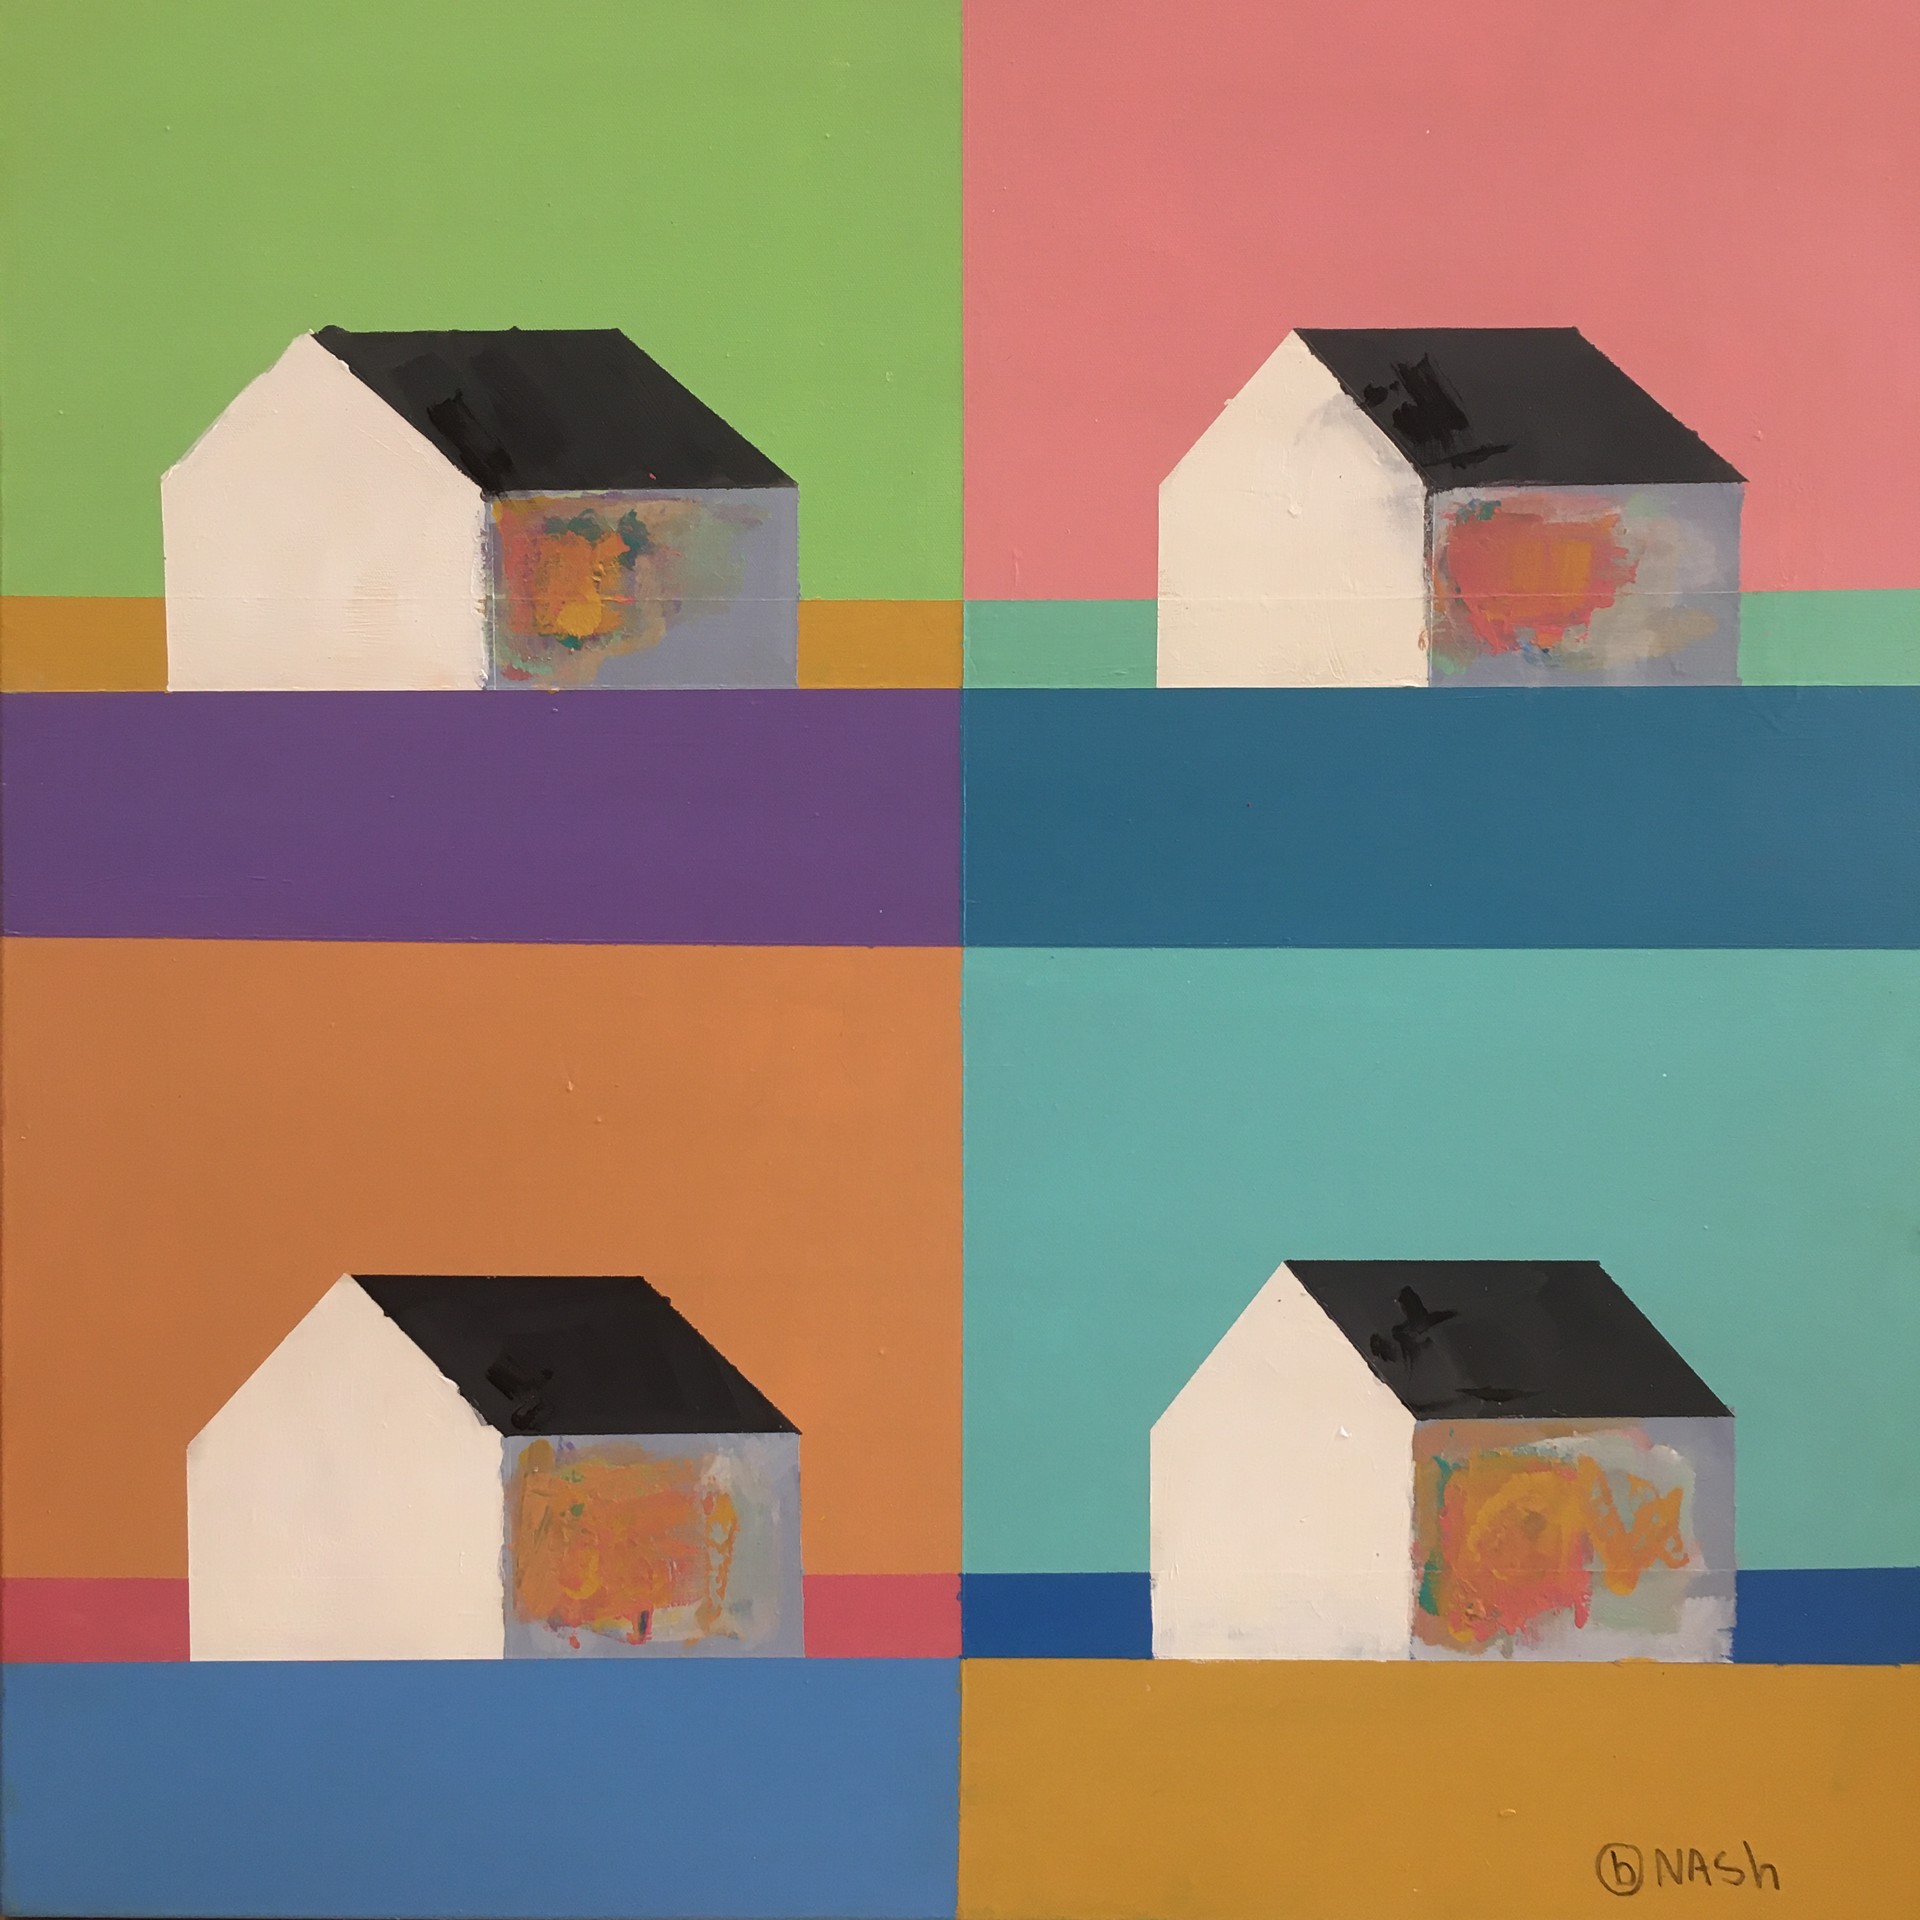 Houses on the Square by Brian Nash